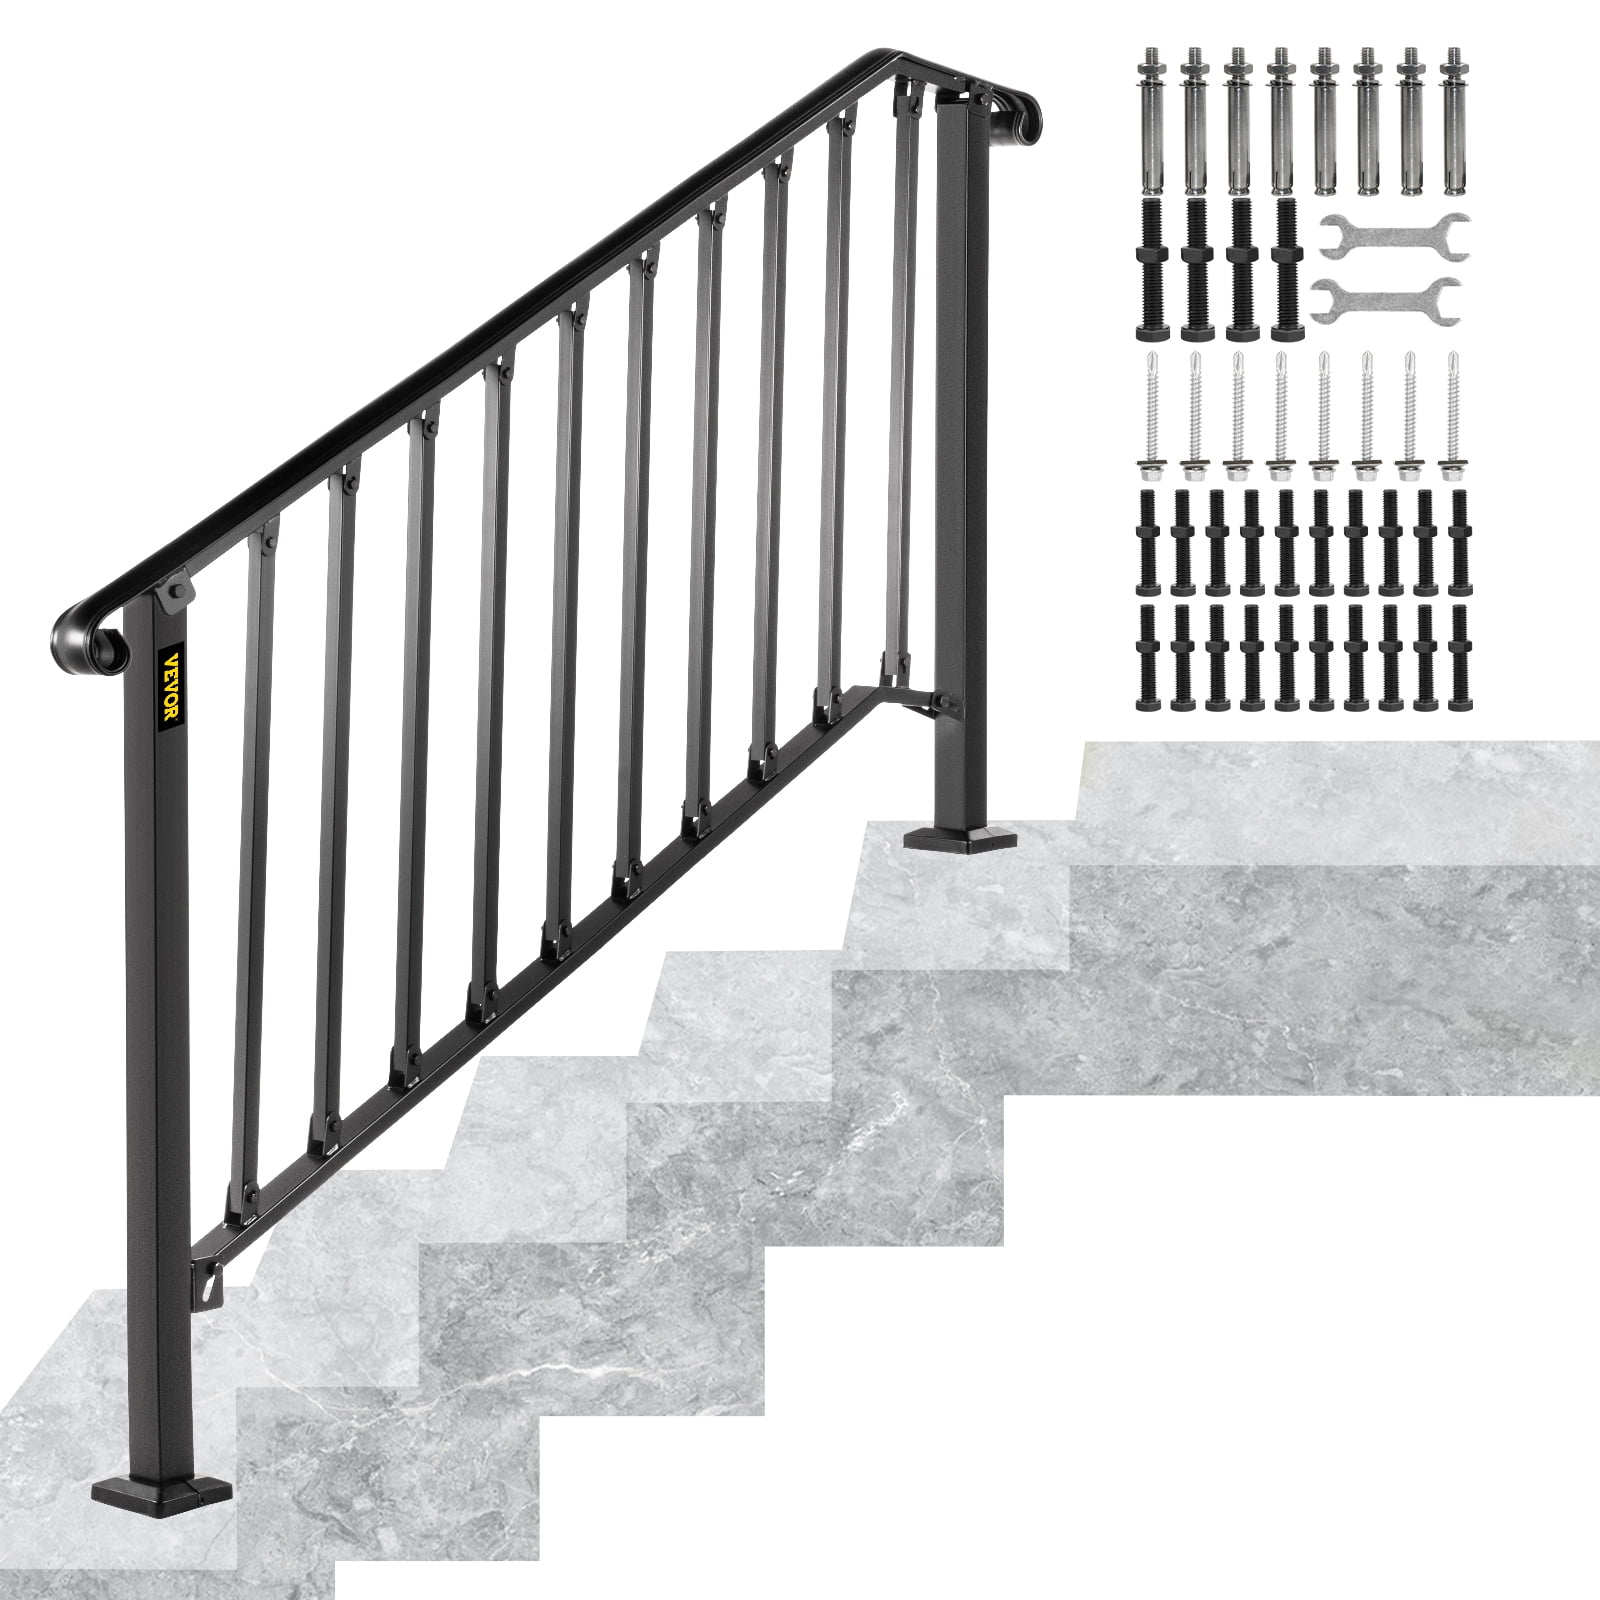 Adjustable Handrail,Handrail Picket #2 Fits 2 to 3 Steps Retro Handrail Stair Rail with Installation Kit Hand Rails for Outdoor Steps,Antique Pewter